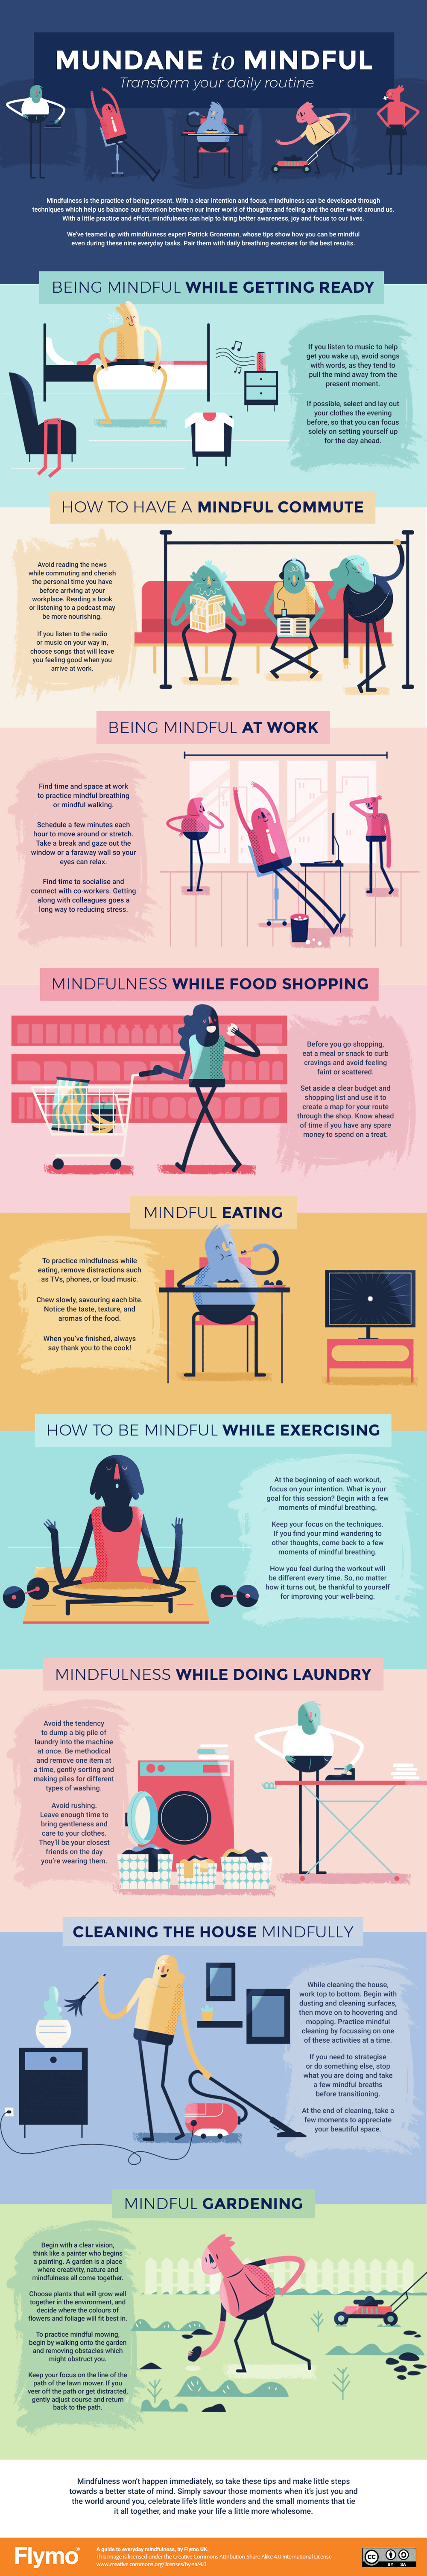 [Infographic] Making Mindfulness A Way Of Life And Work2